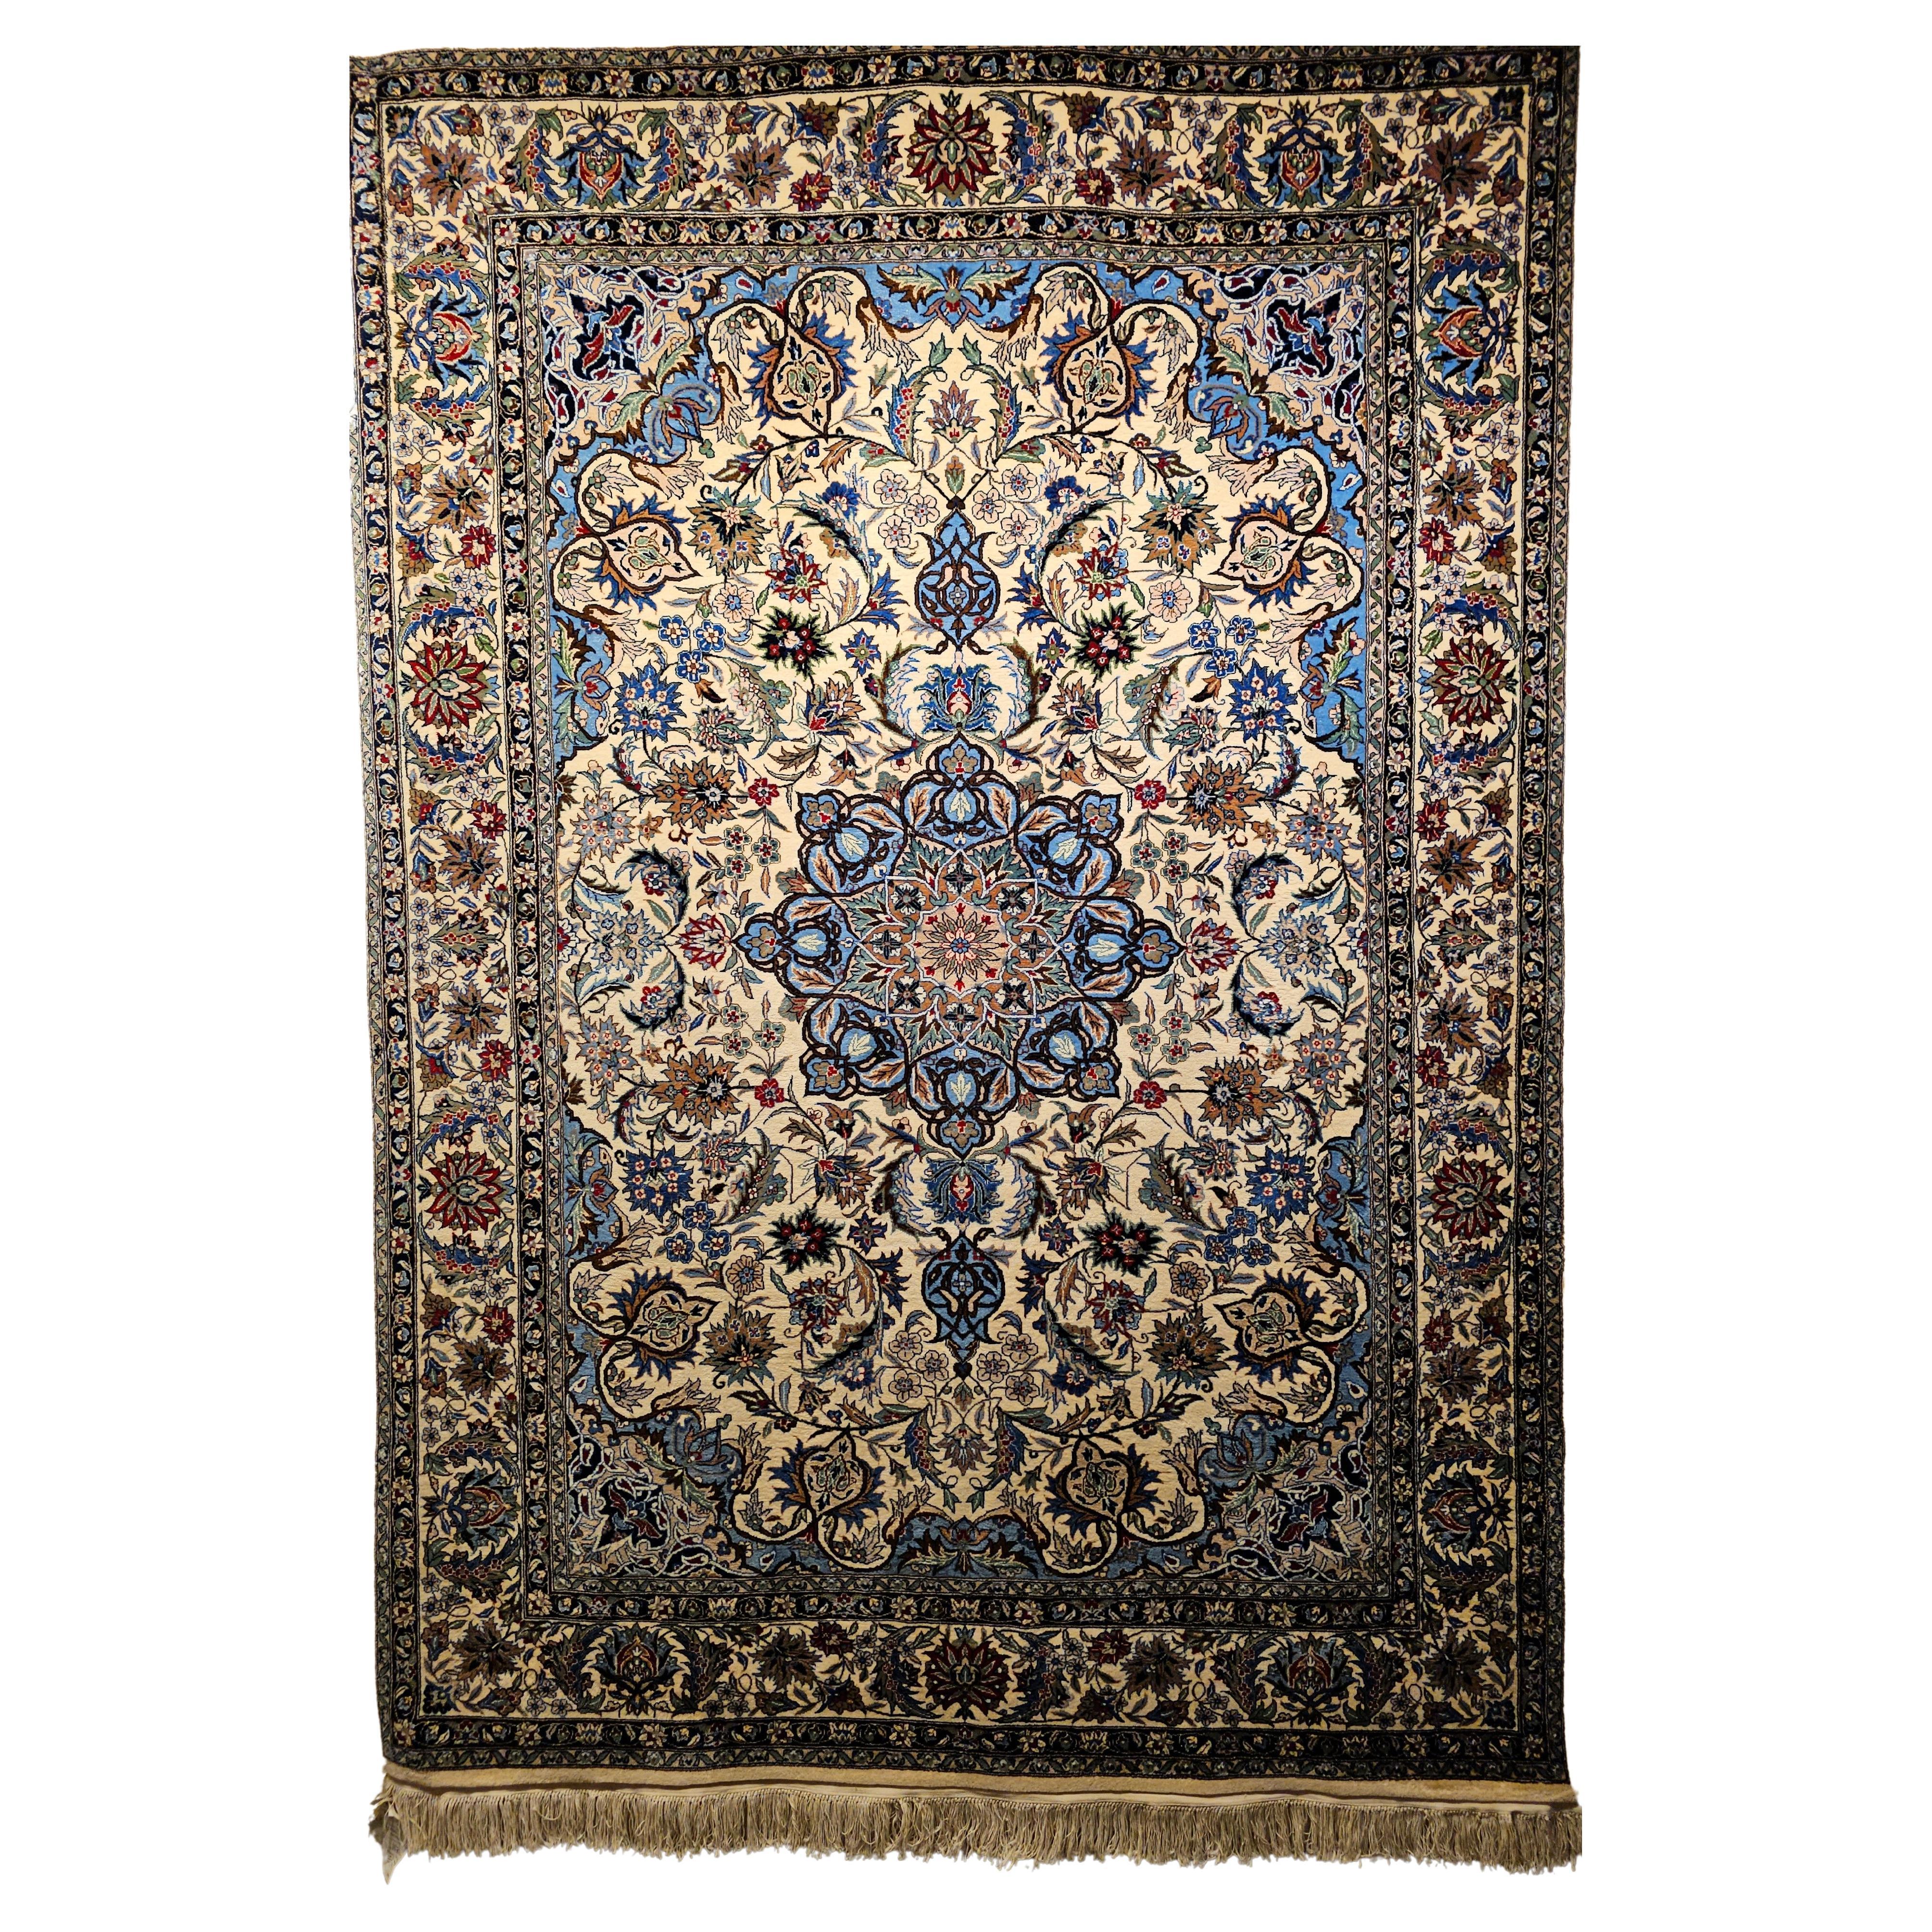 Vintage Tabriz Rug in Floral Design With French Blue, Green, and Ivory Colors